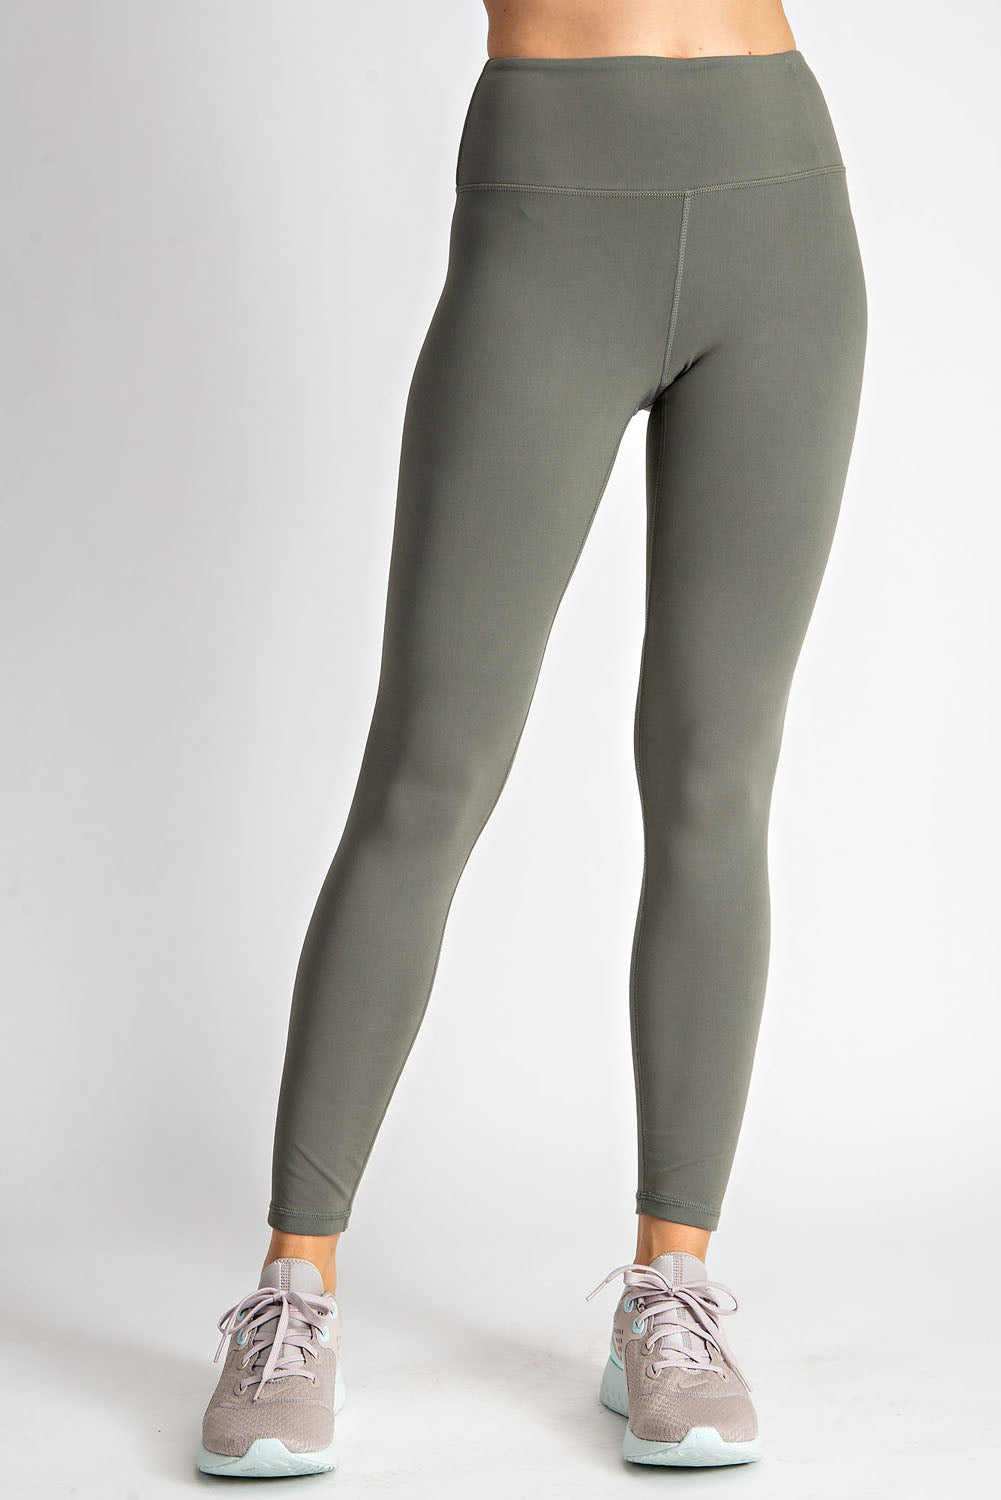 butter soft leggings, butter soft leggings Suppliers and Manufacturers at